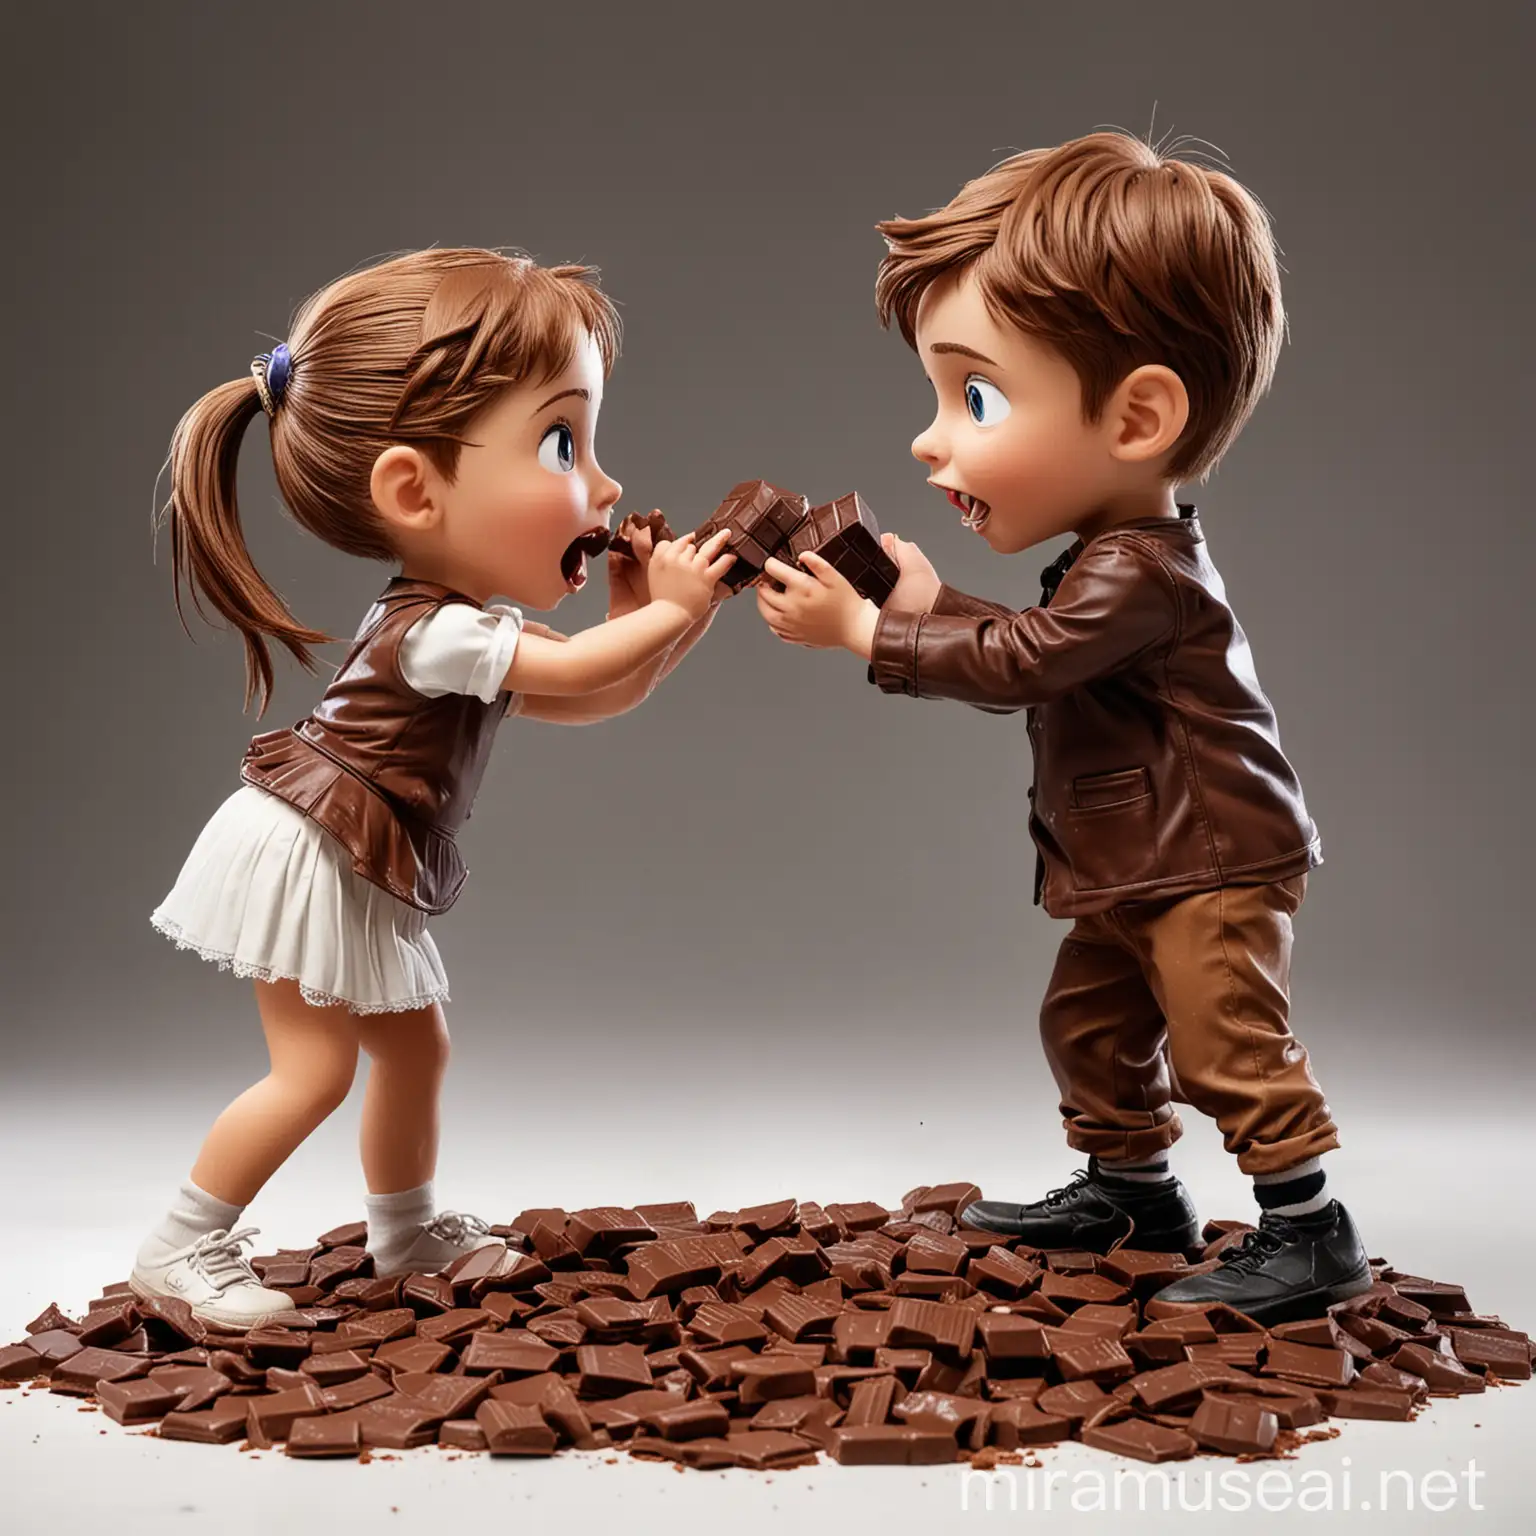 a boy and girl fighting for chocolate